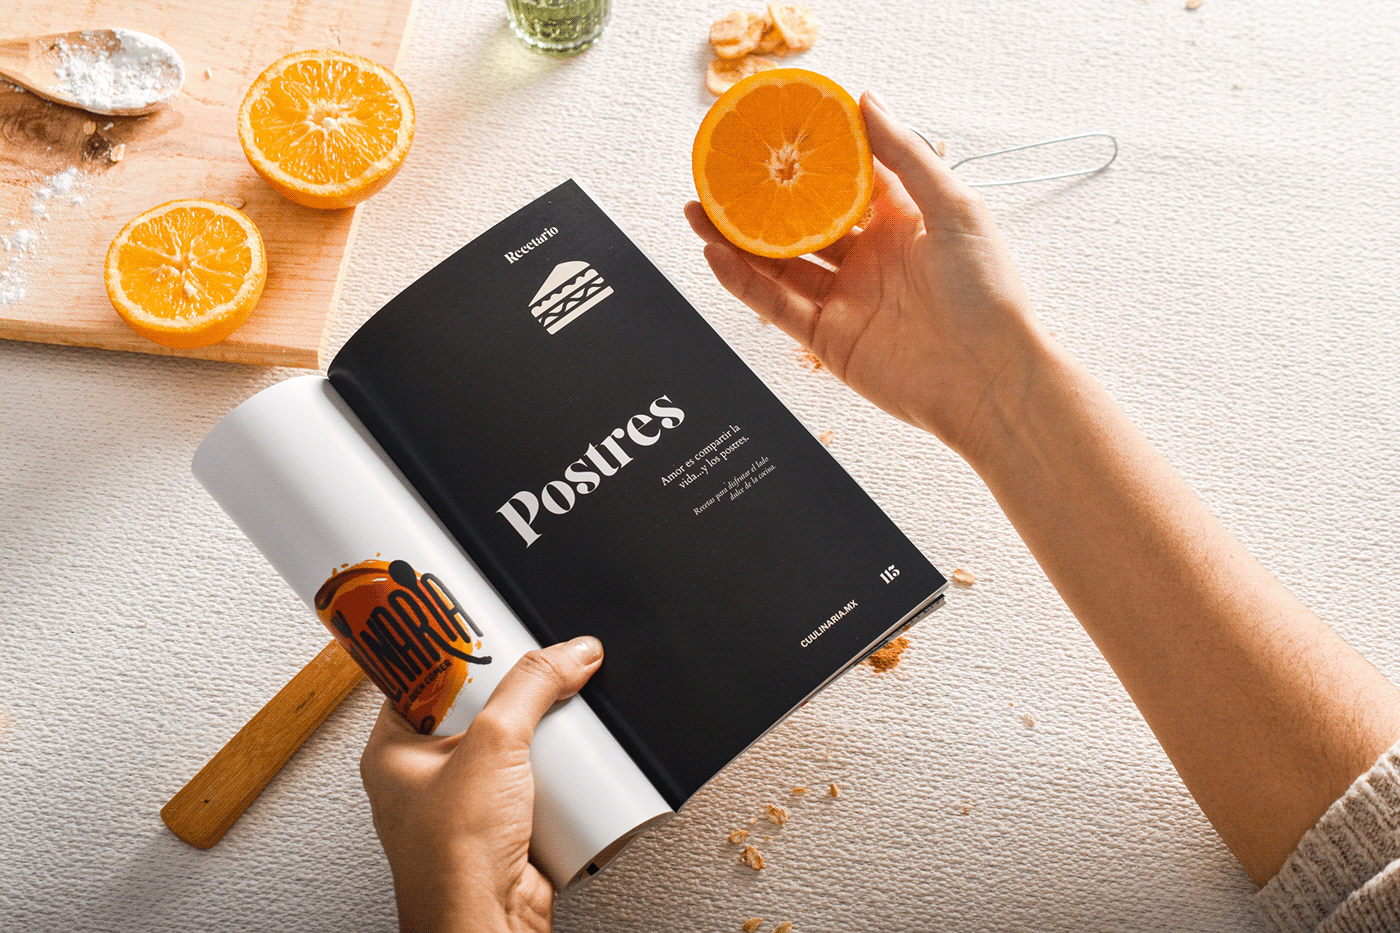 Spread of cookbook and orange in hand.